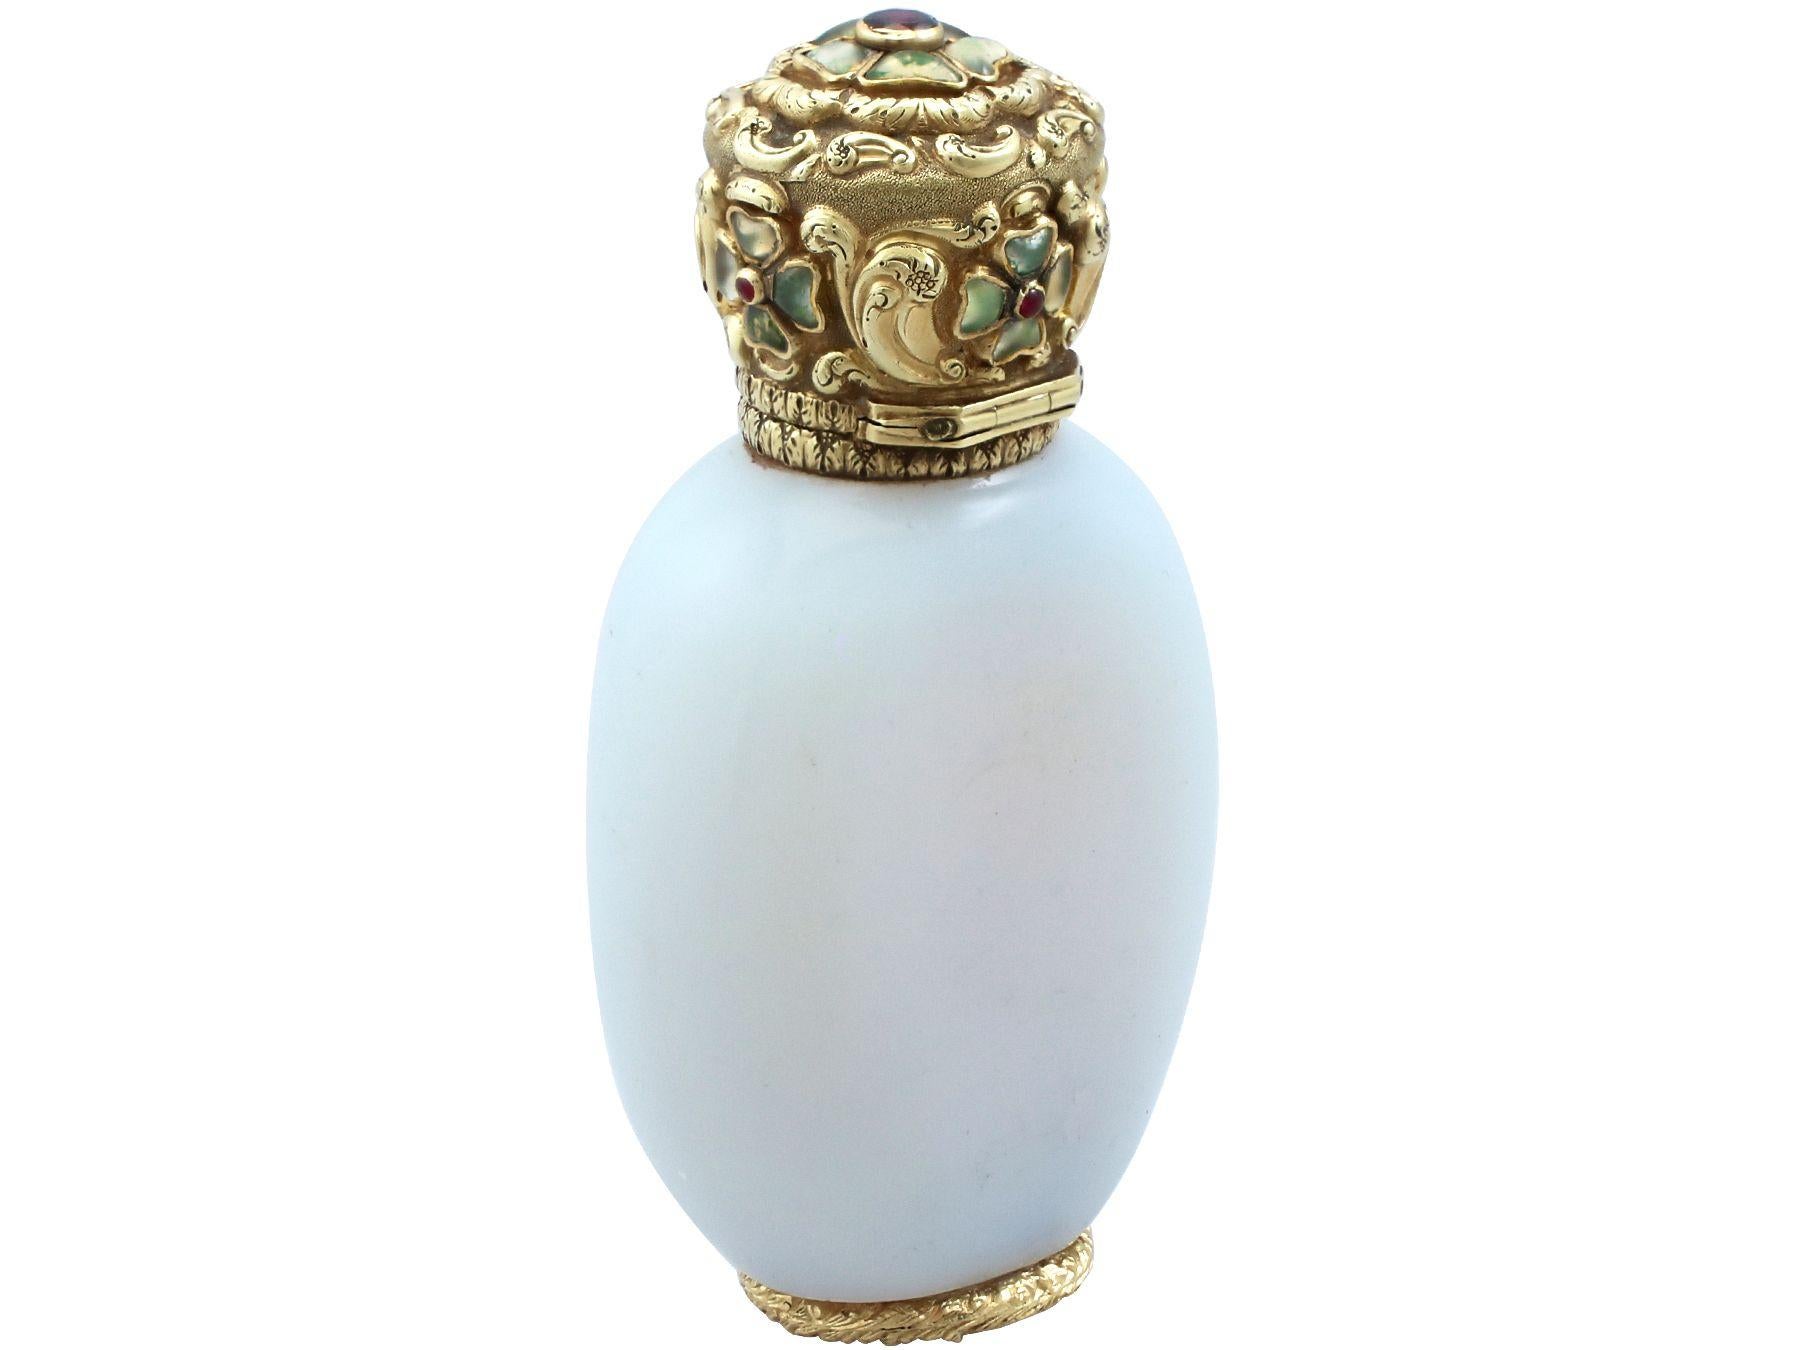 Antique Yellow Gold, Garnet, Ruby, Hardstone and Glass Scent Bottle, circa 1845 For Sale 1